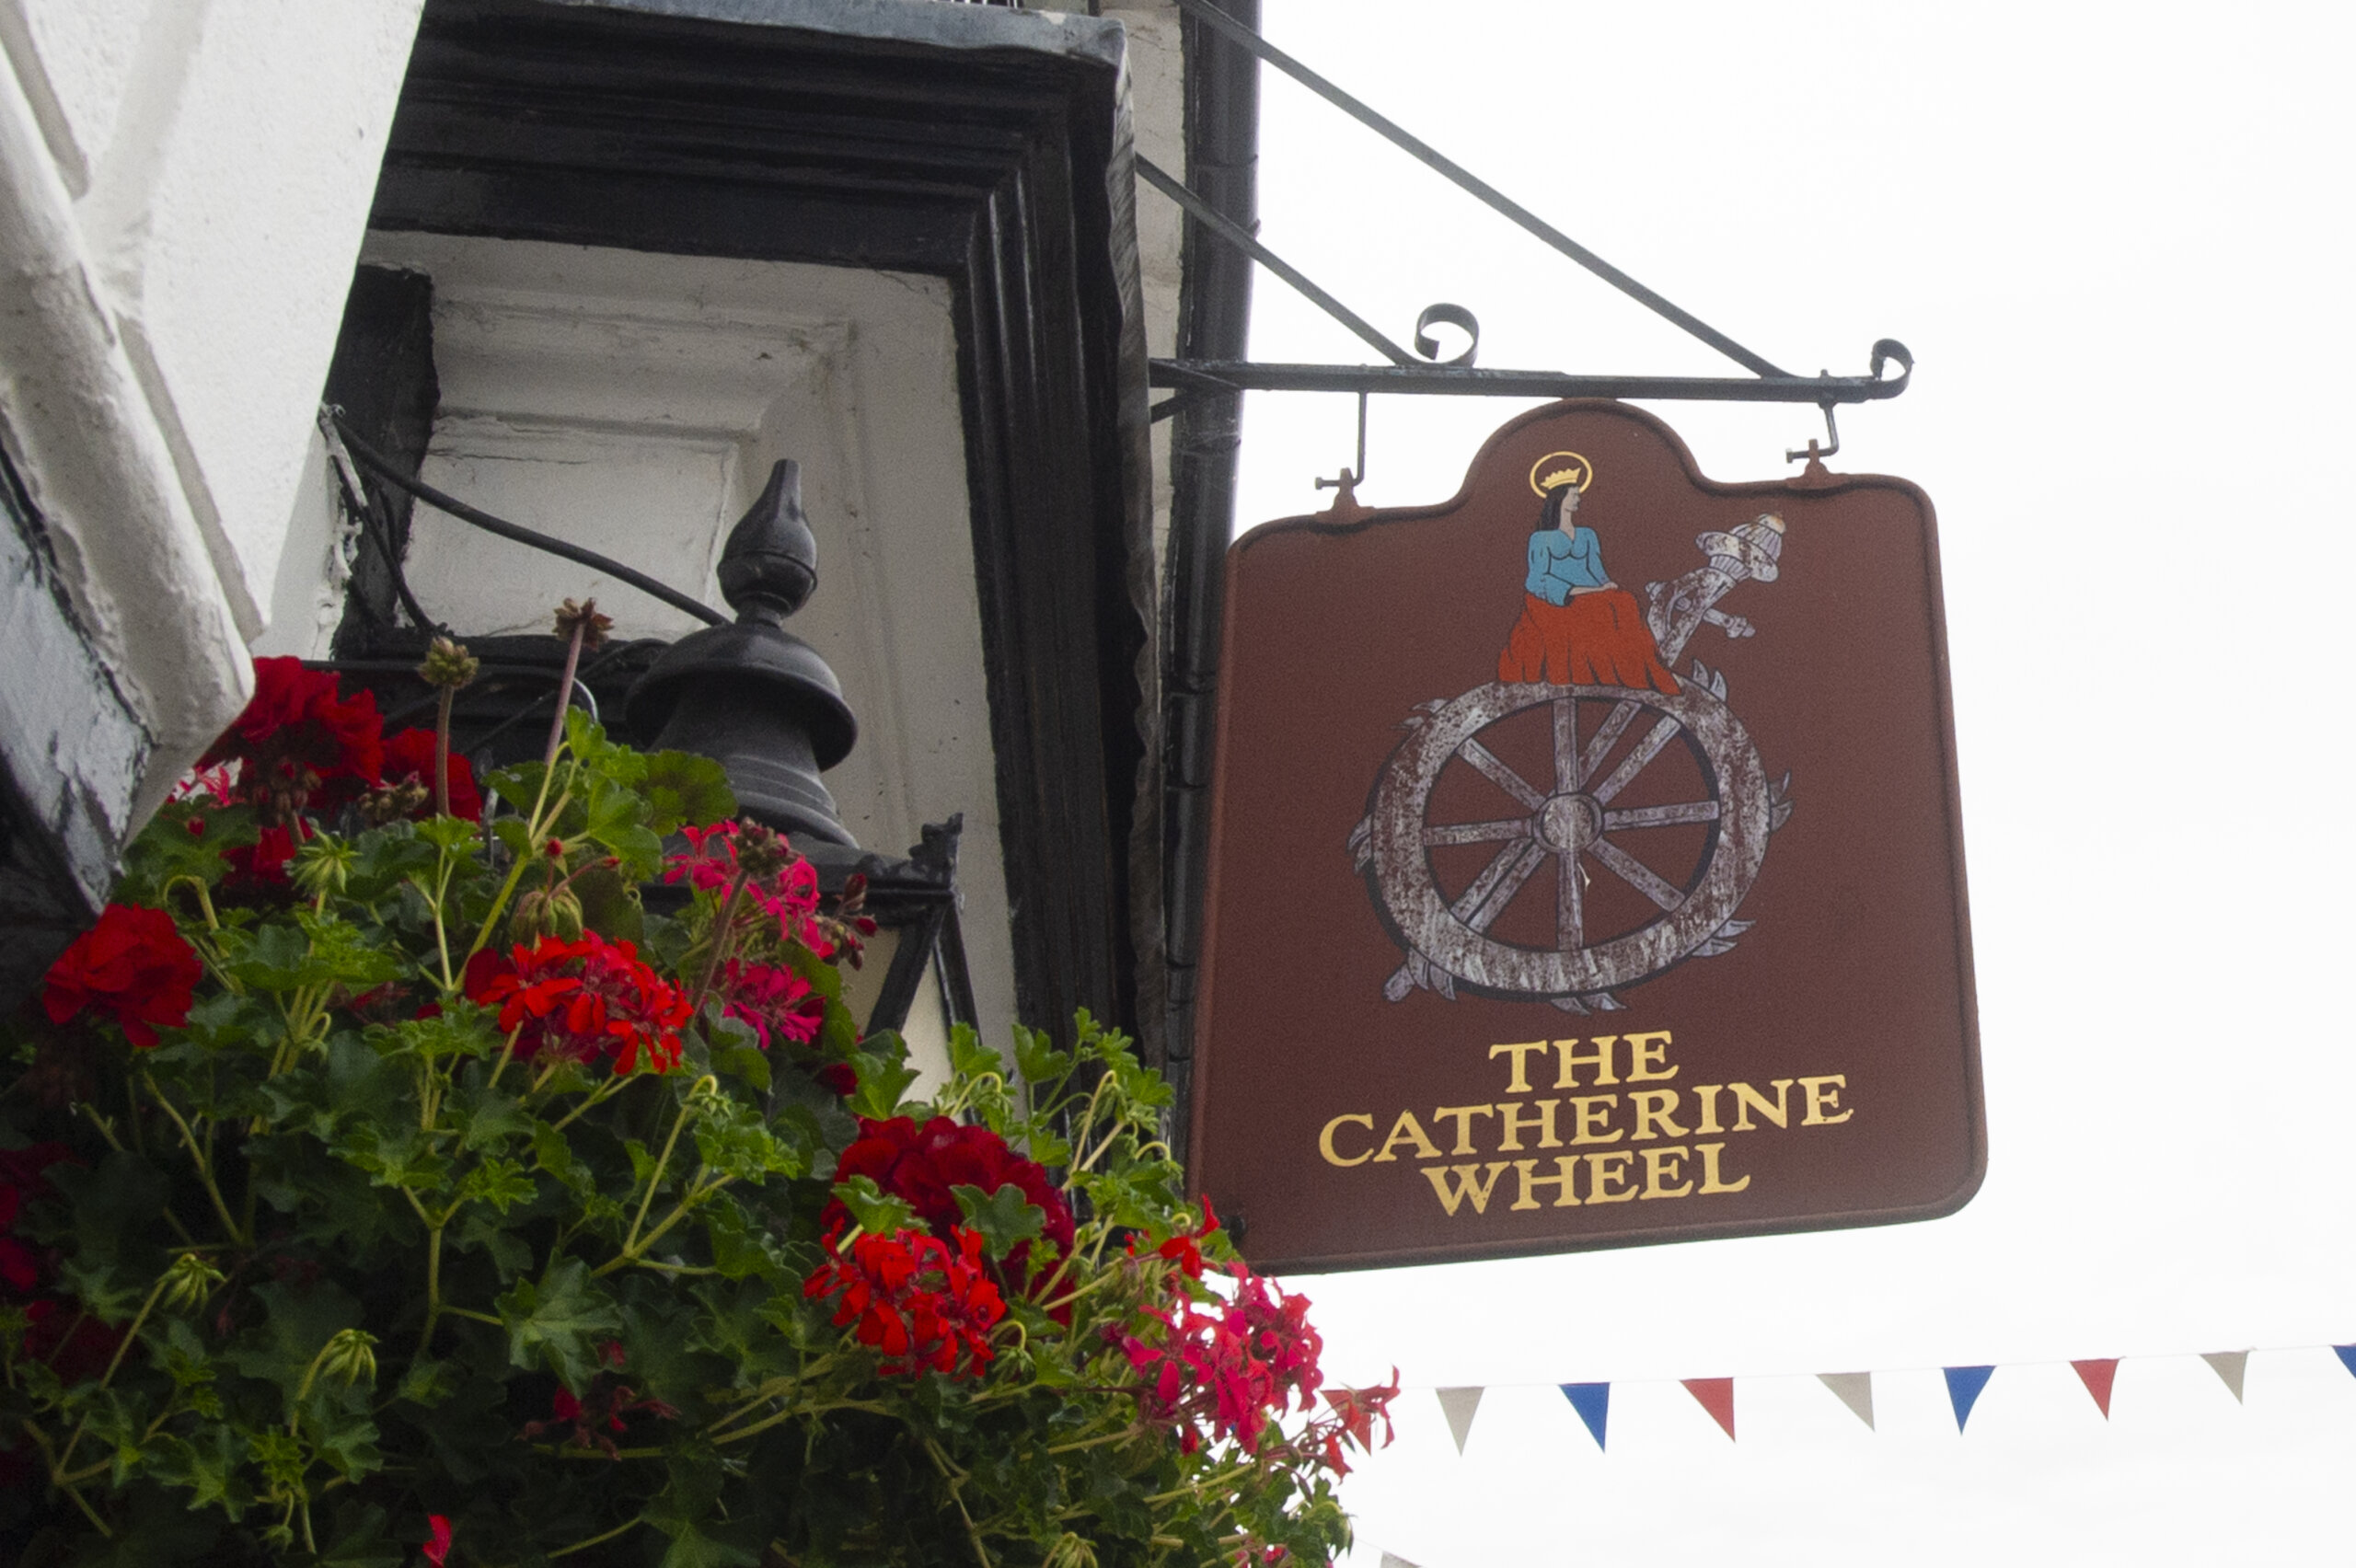 The Catherine Wheel, Henley-on-Thames signage